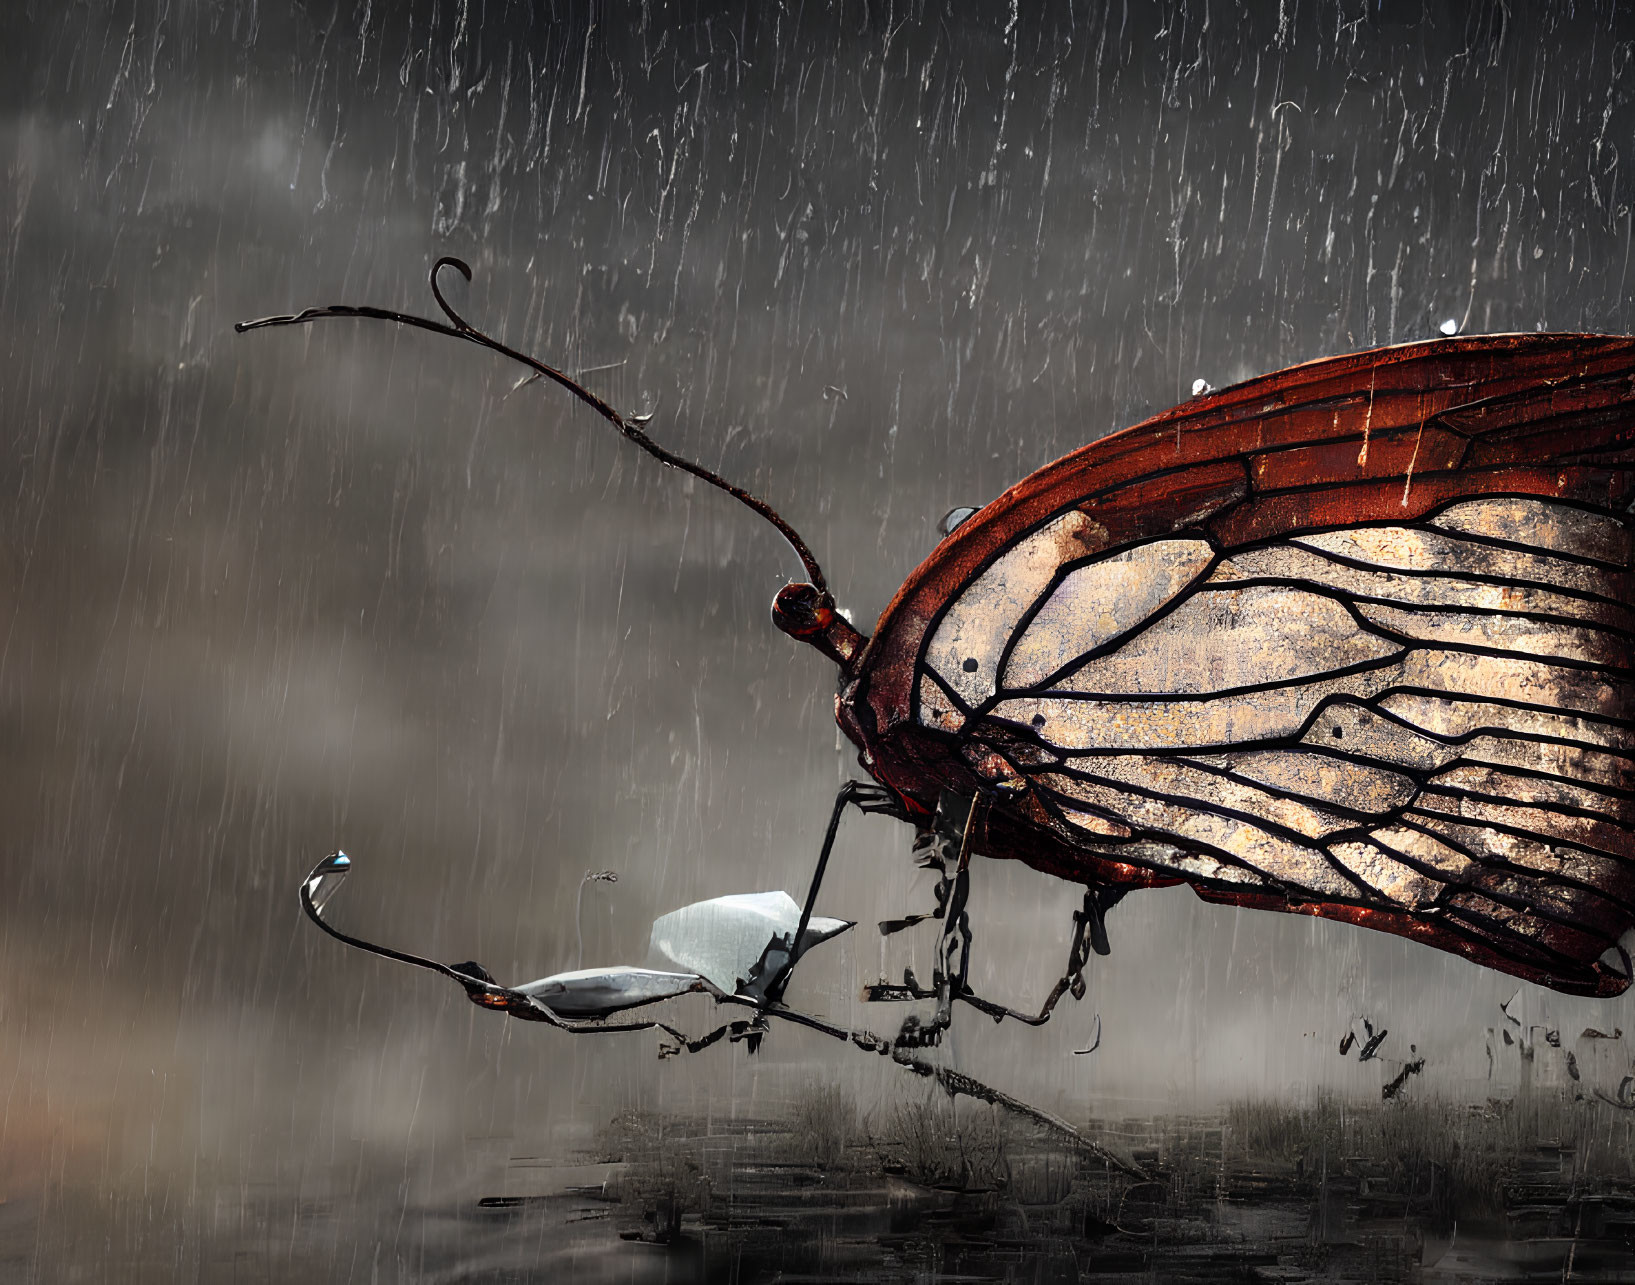 Metallic butterfly structure in rain near pond with figure on boat